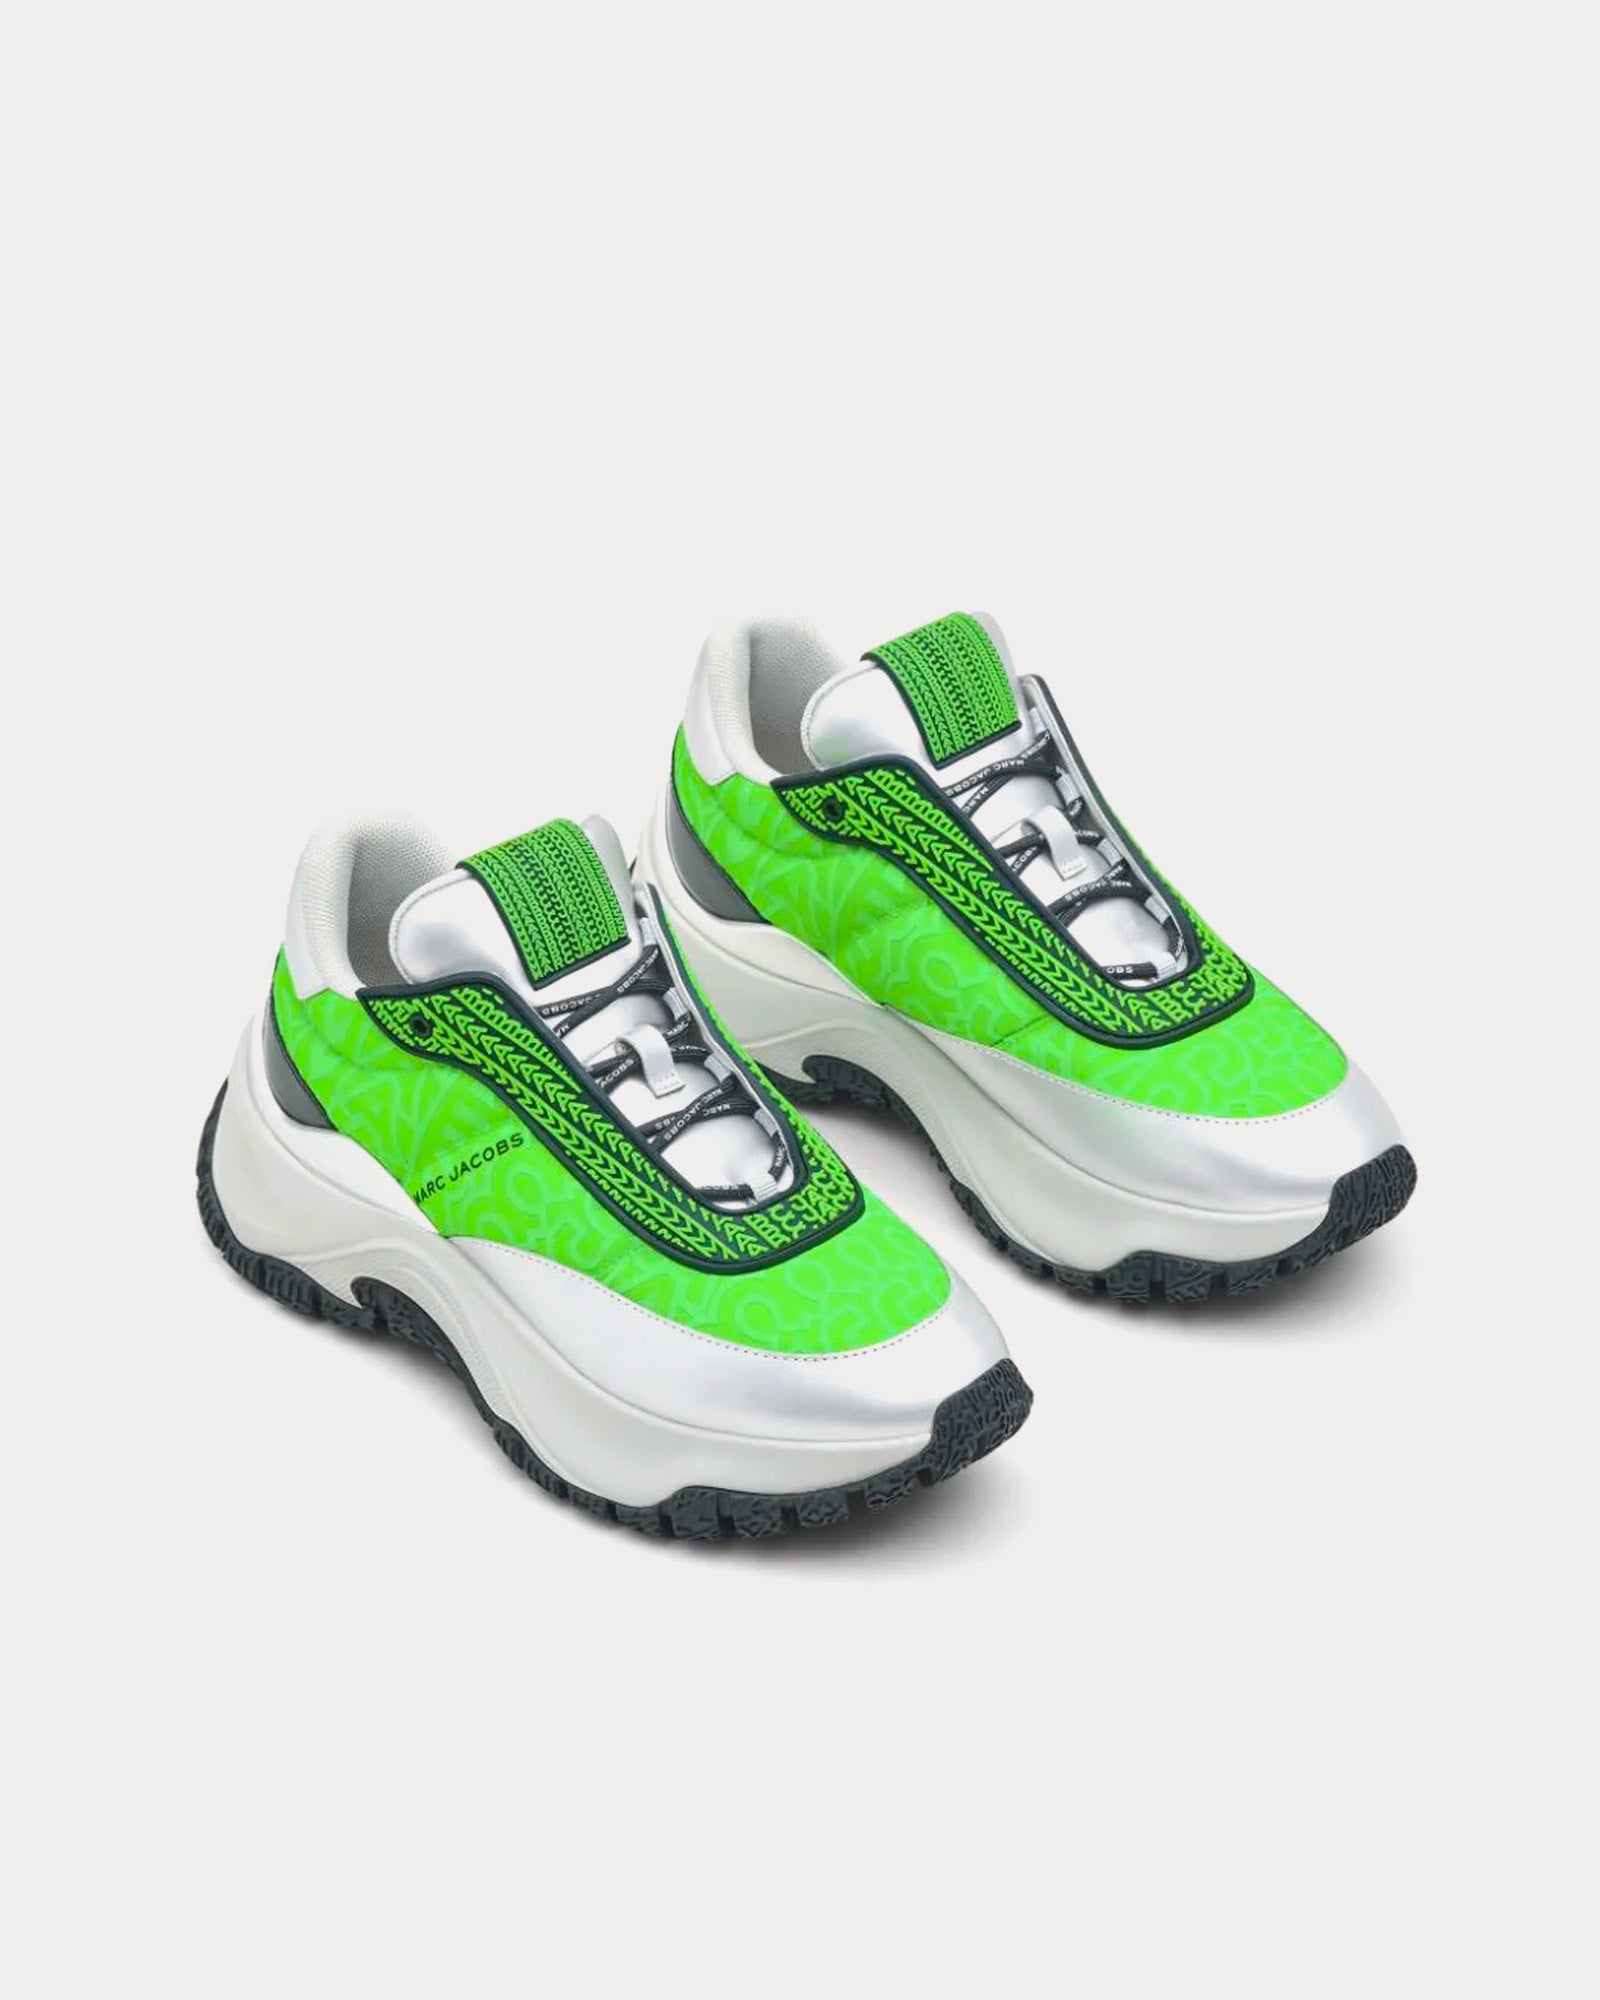 Marc Jacobs - The Monogram Lazy Runner Silver / Green  Low Top Sneakers